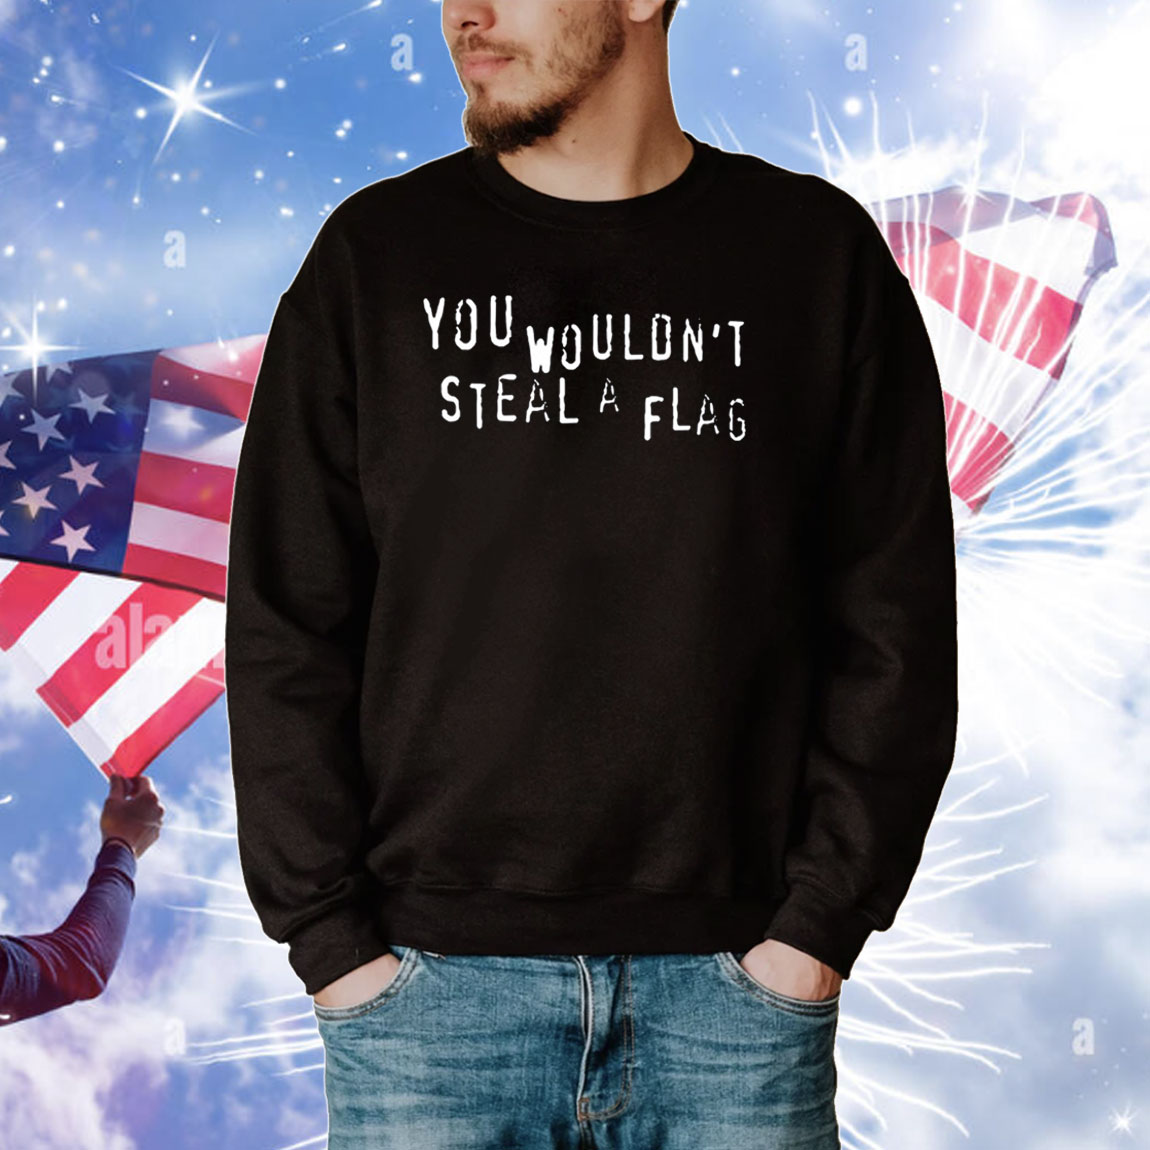 You Wouldn't Steal A Flag TShirts